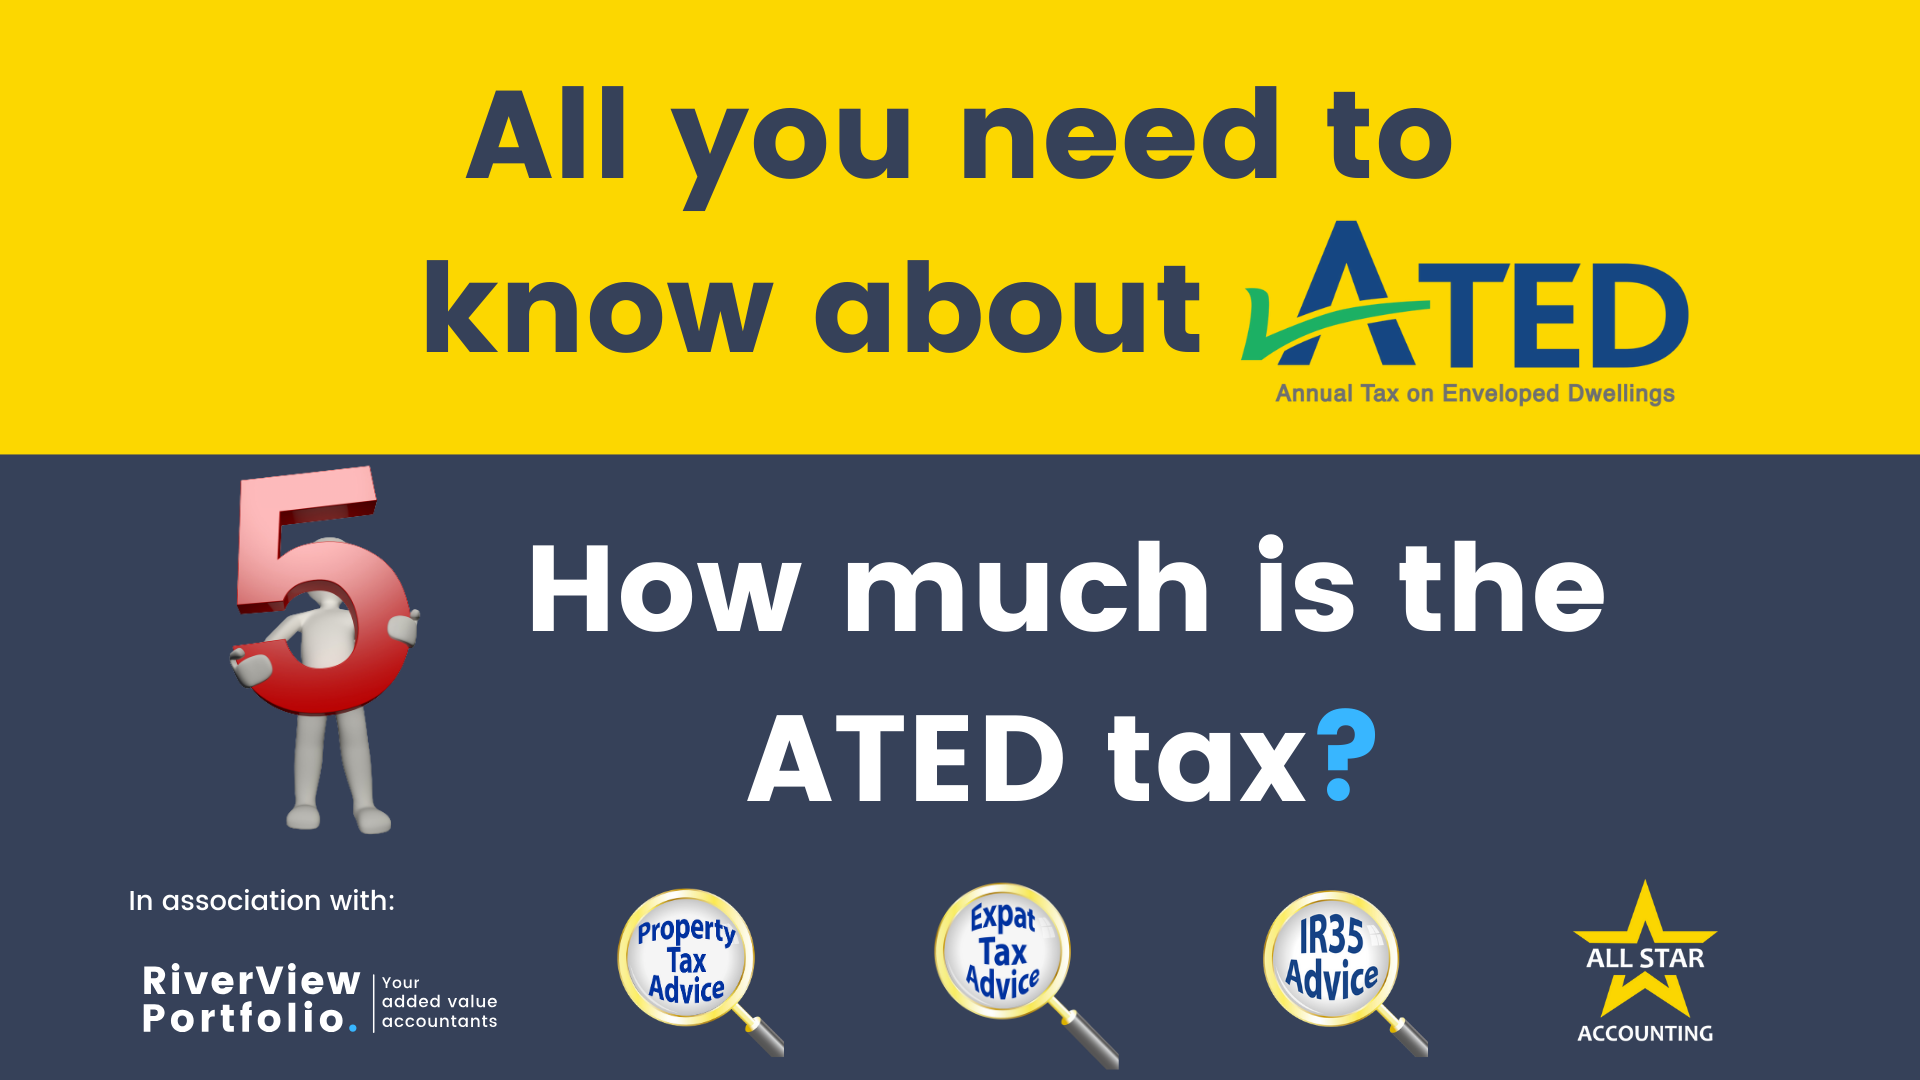 ated, annual tax on envelope dwellings tax, ATED tax